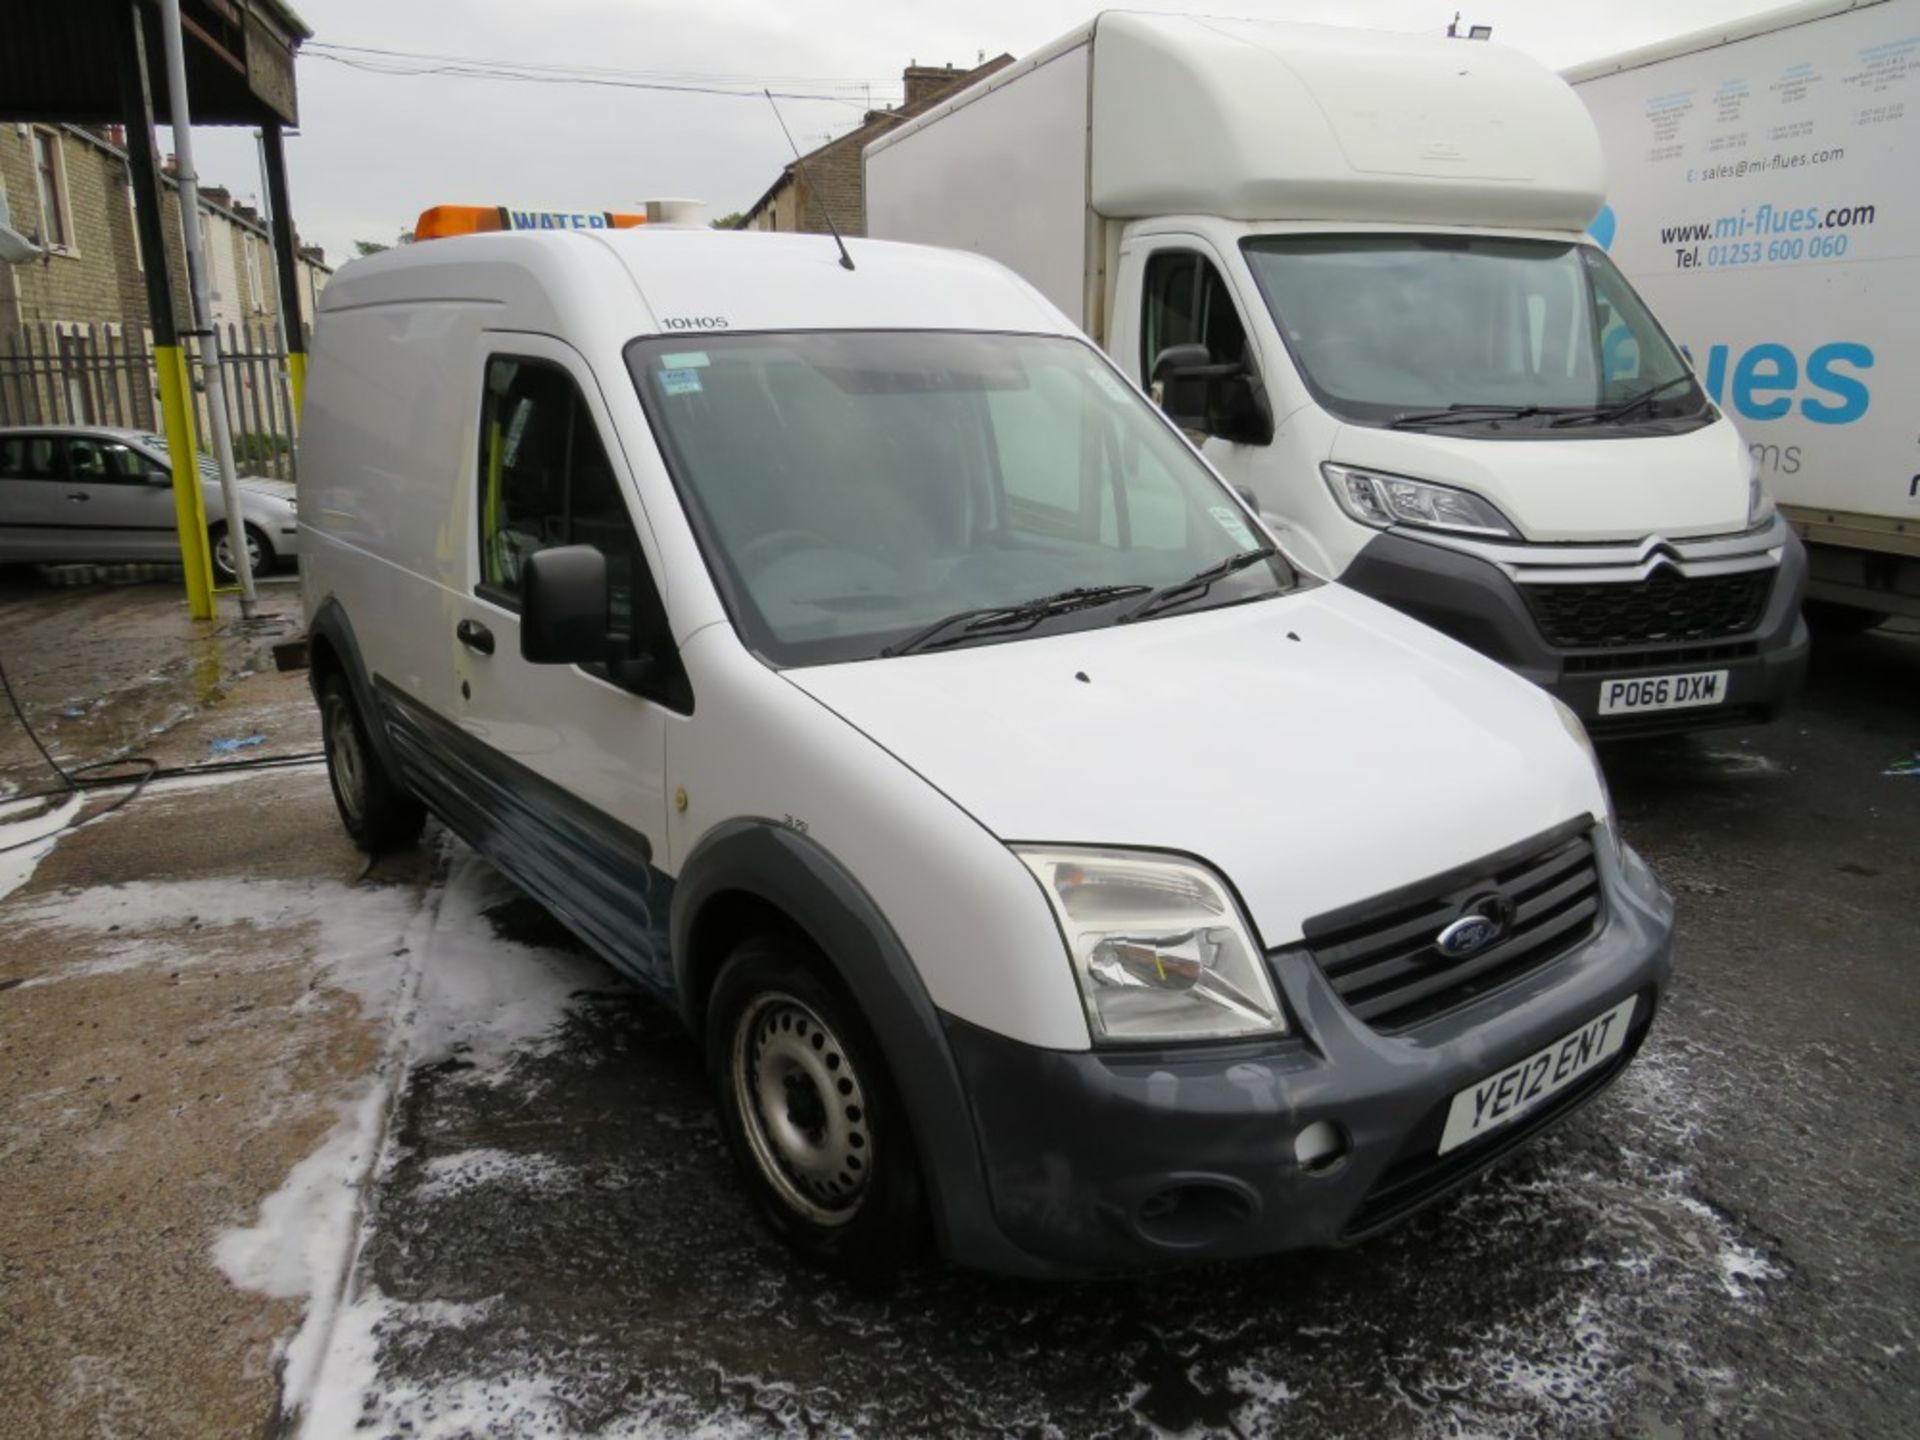 12 reg FORD TRANSIT CONNECT 90 T230 (DIRECT UNITED UTILITIES WATER) 1ST REG 07/12, TEST 04/21, V5